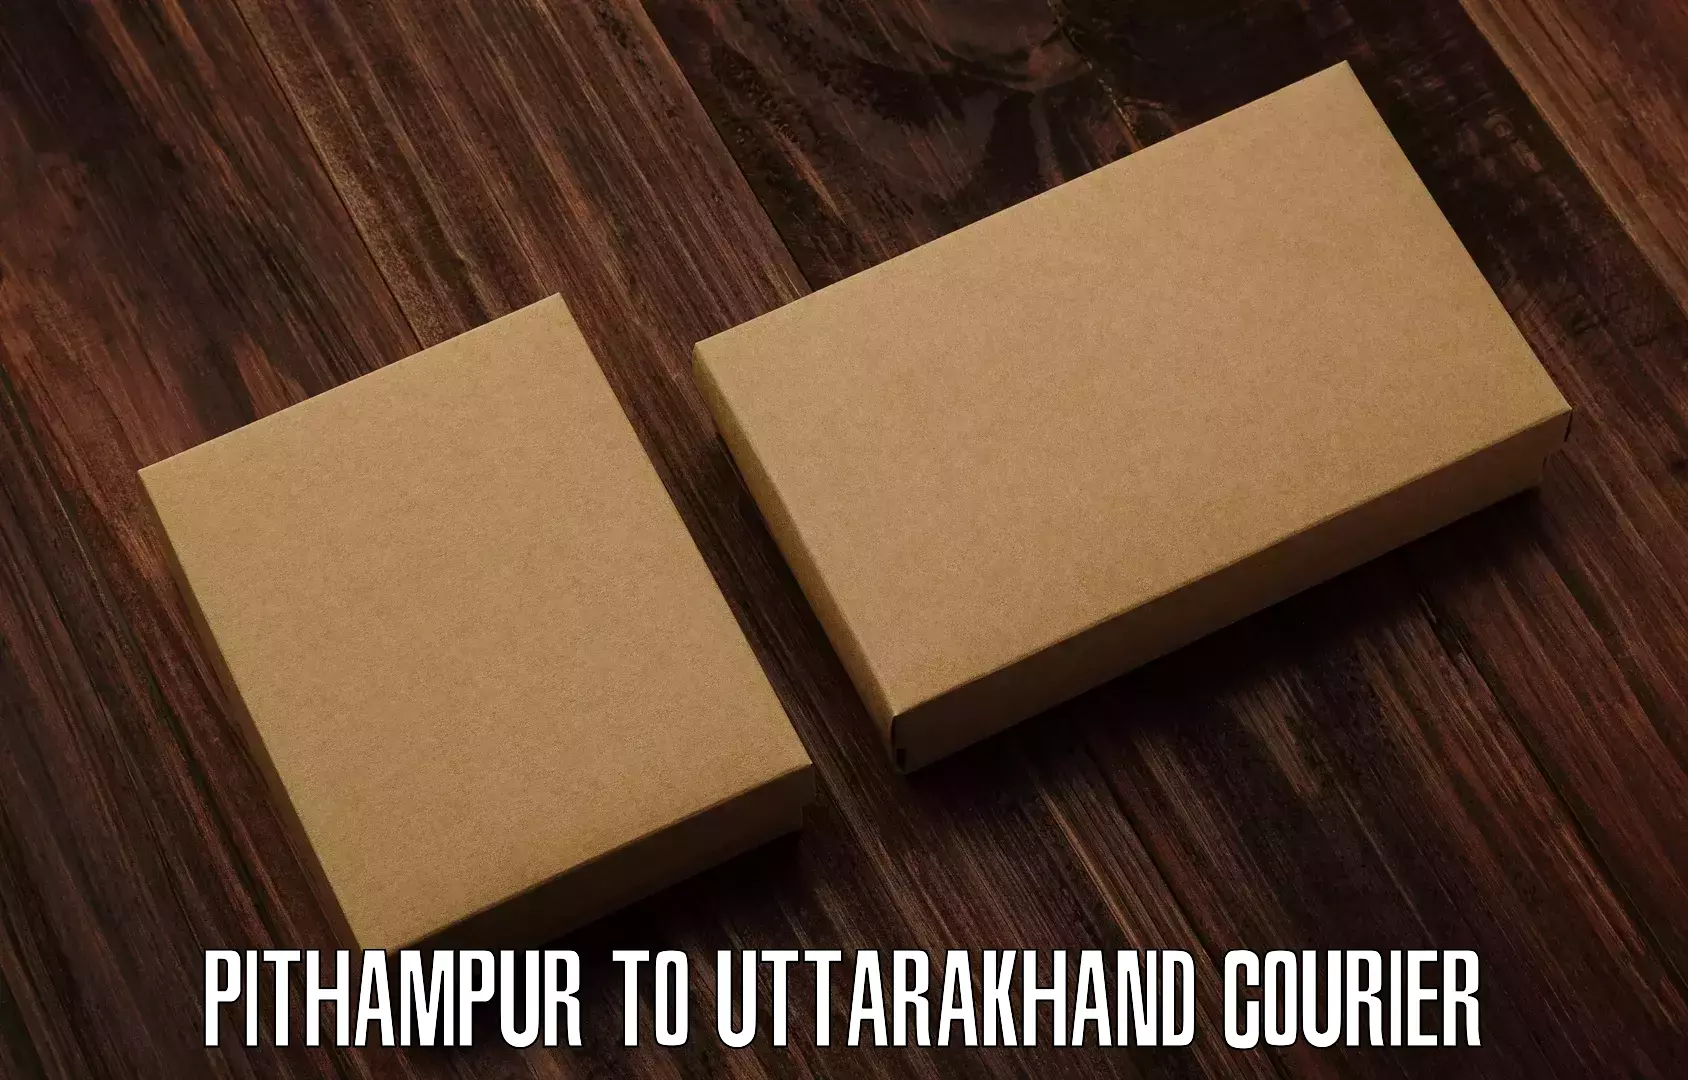 Automated parcel services Pithampur to Rishikesh